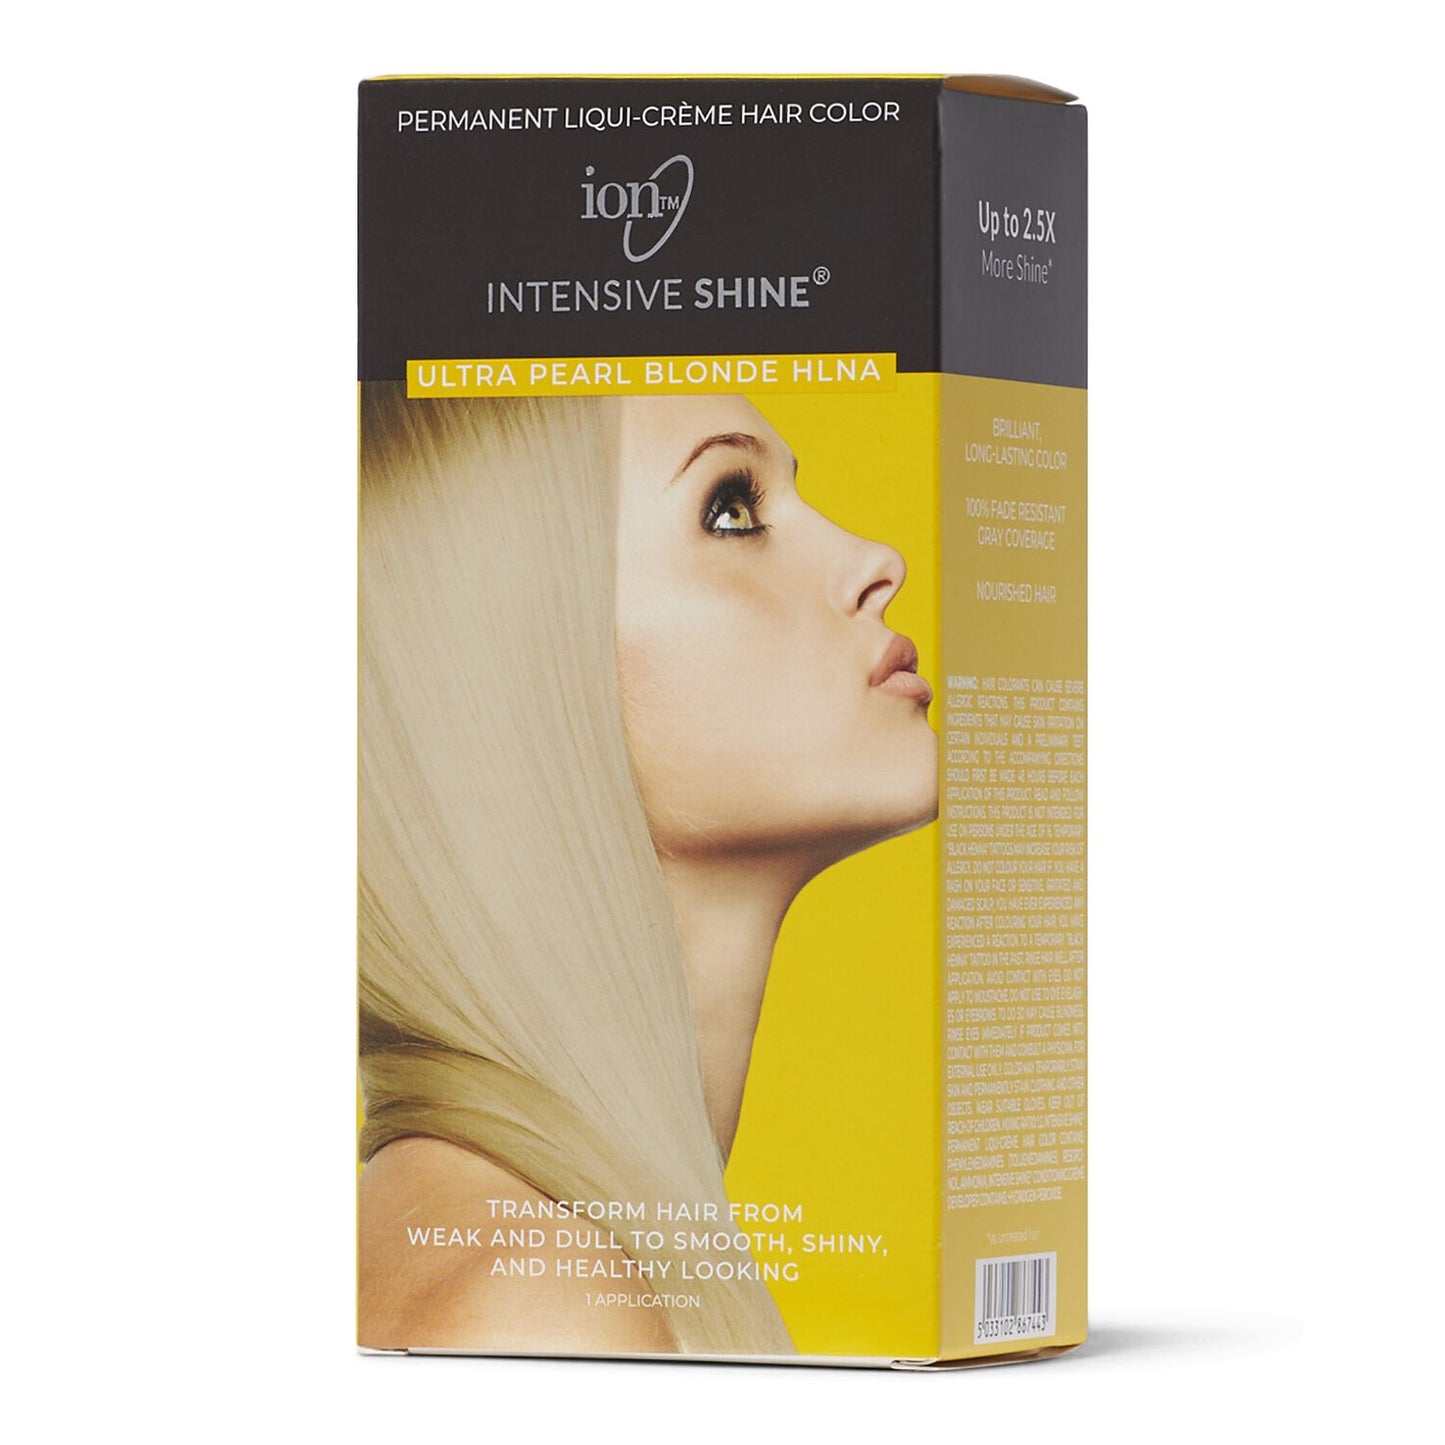 Intensive Shine  by   ion Intensive Shine Hair Color Kit Ultra Pearl Blonde HLNA